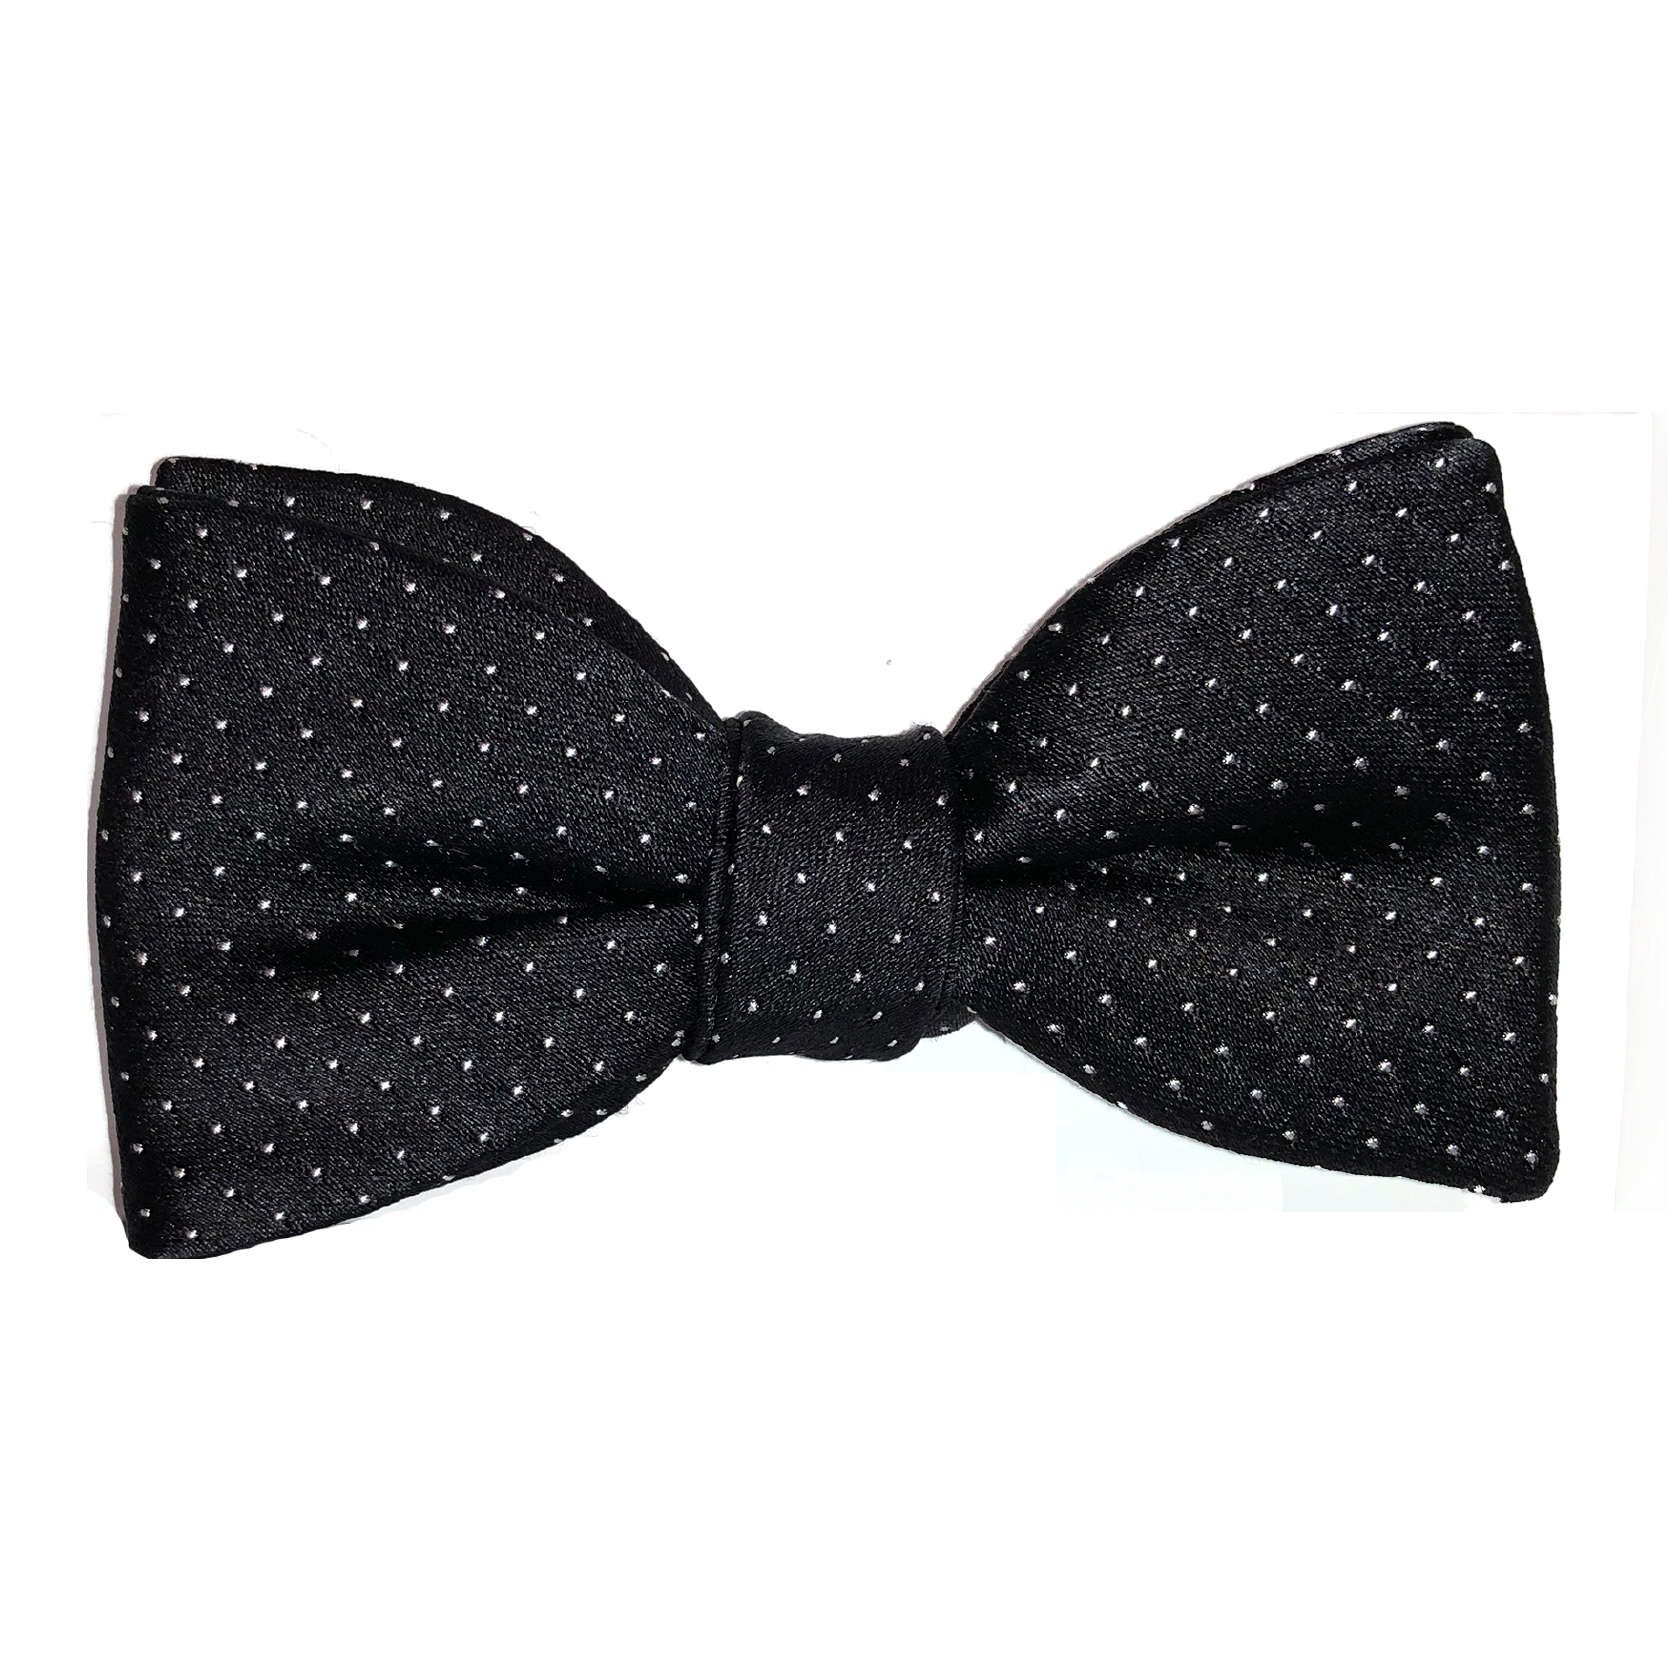 Silk Bow Tie Navy Blue and White Pin Spot